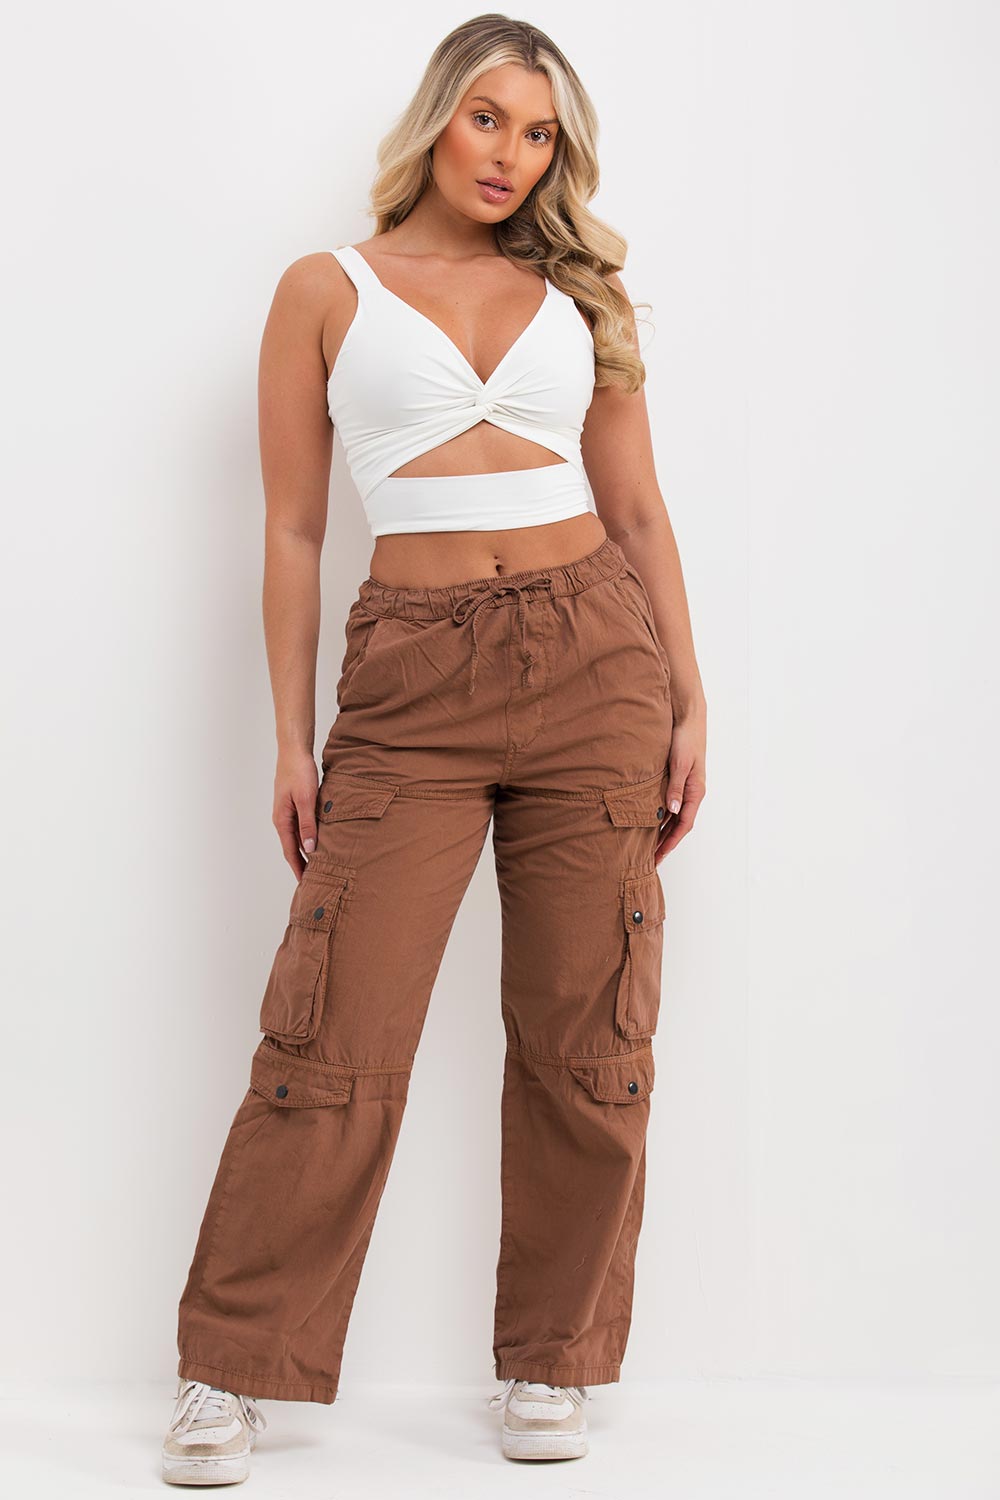 slinky going out crop top white